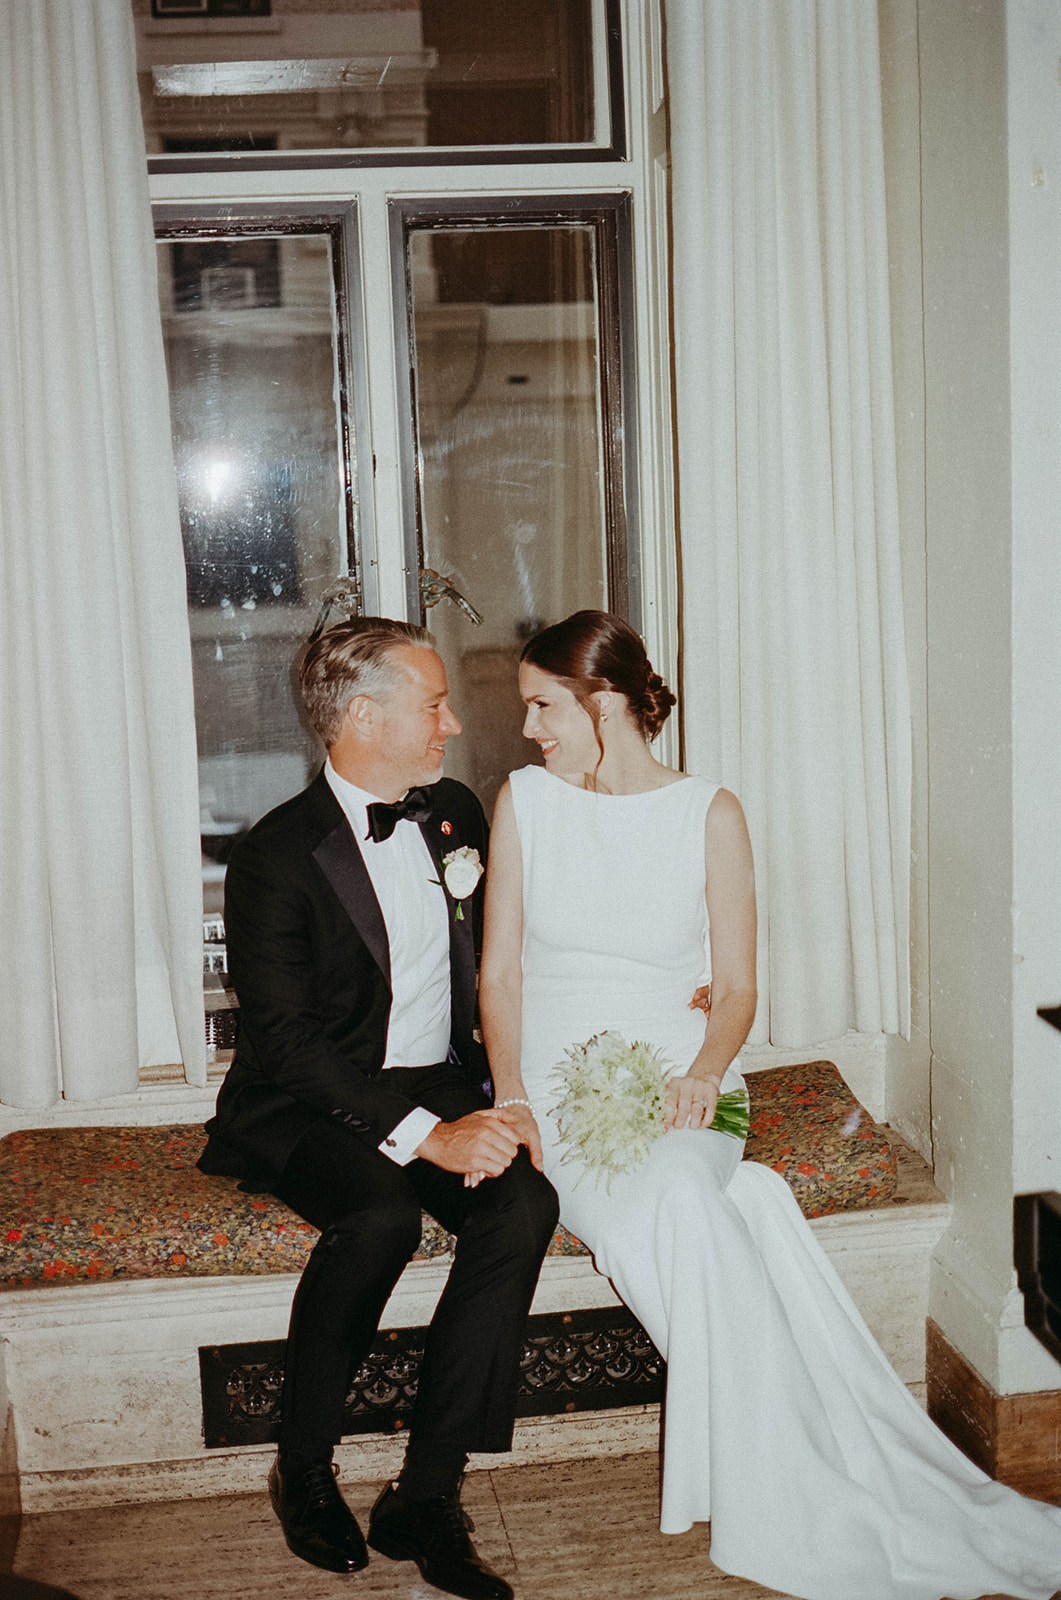 A Freehand Hotel Wedding in Manhattan, NYC shot by weddings by nato